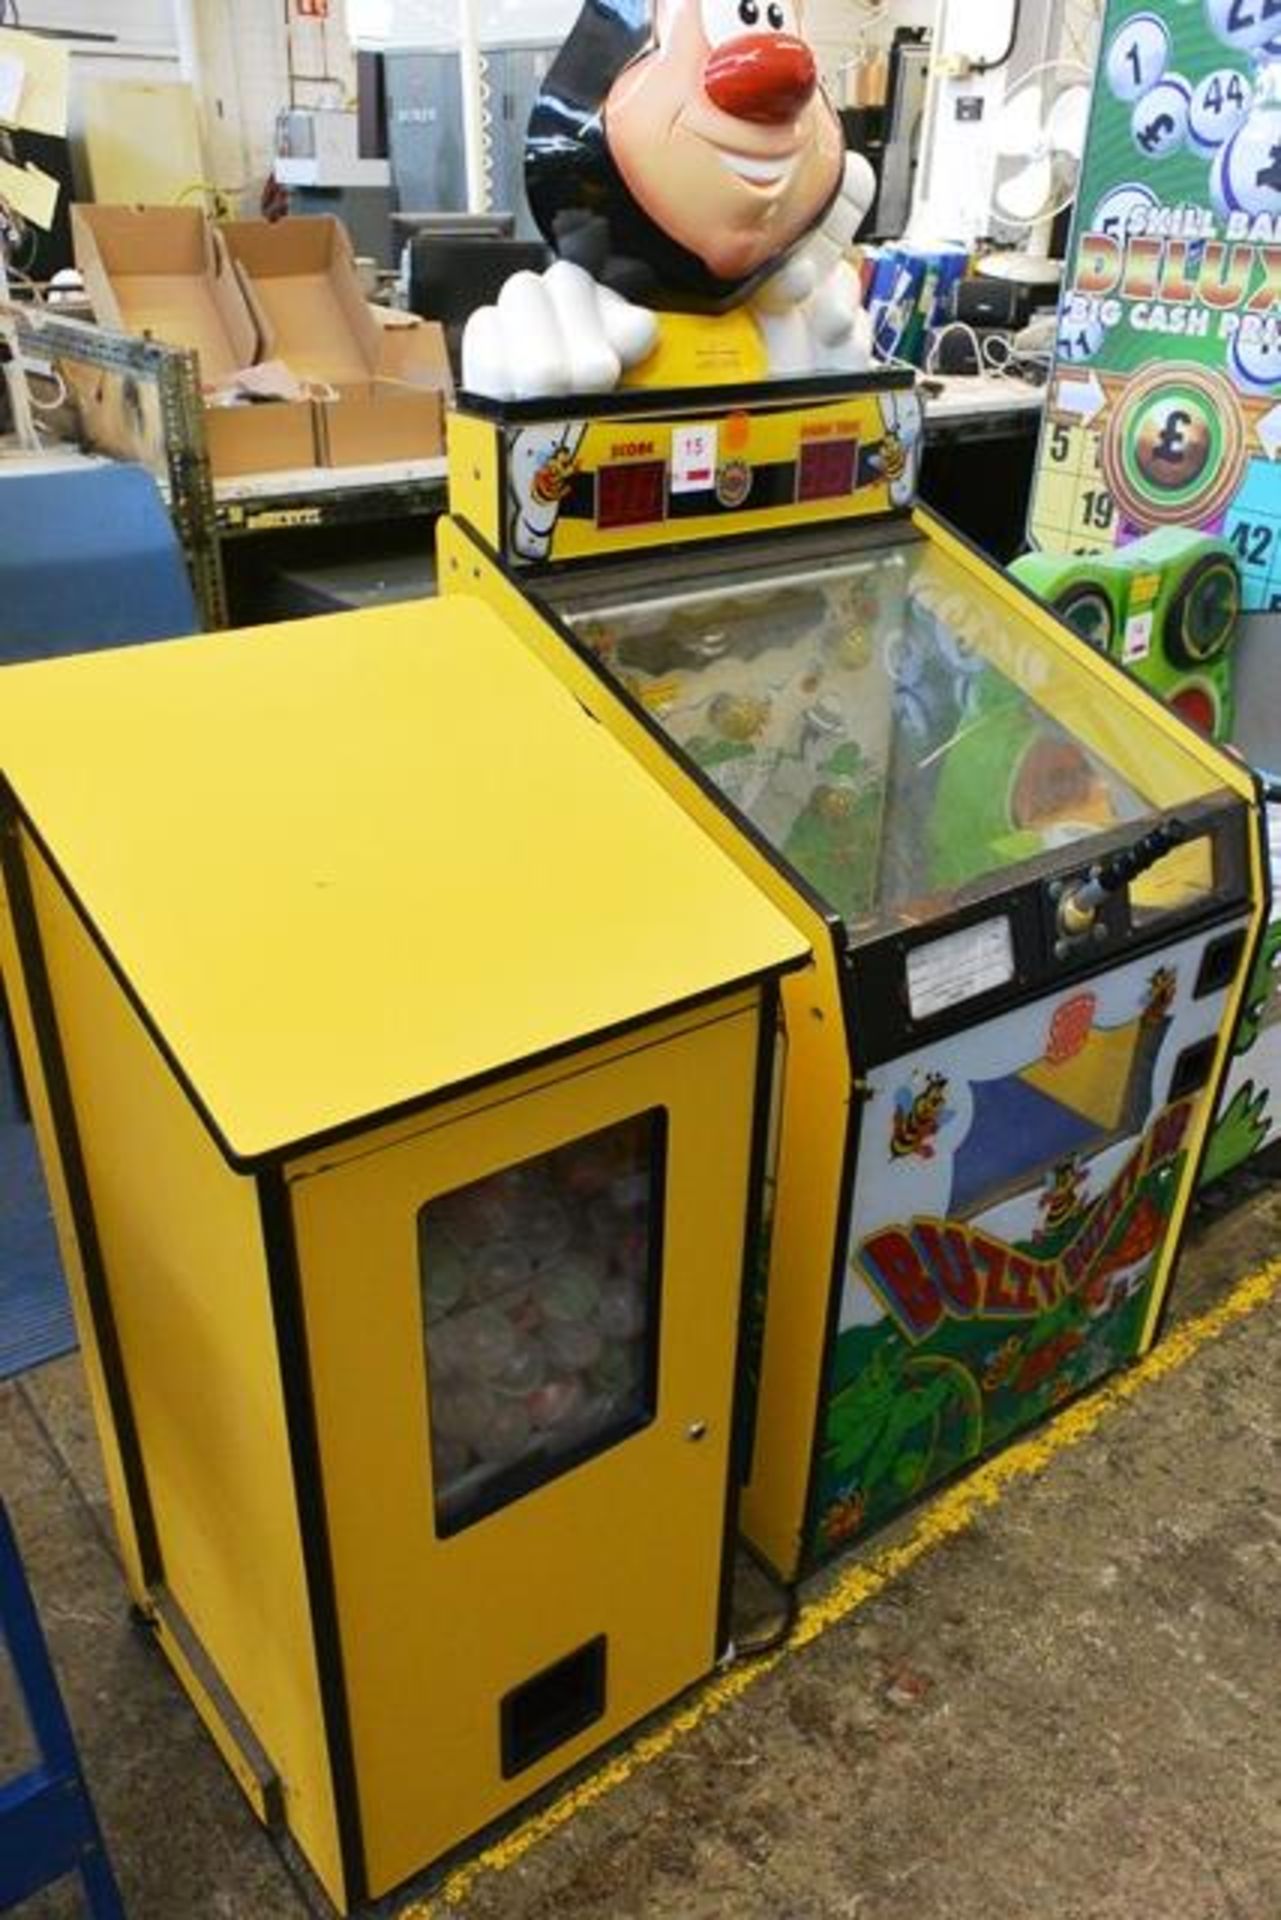 Sound Leisure Systems "Buzzy Buzzy Bee" pay to play machine, with associated prize dispenser ( - Image 4 of 4